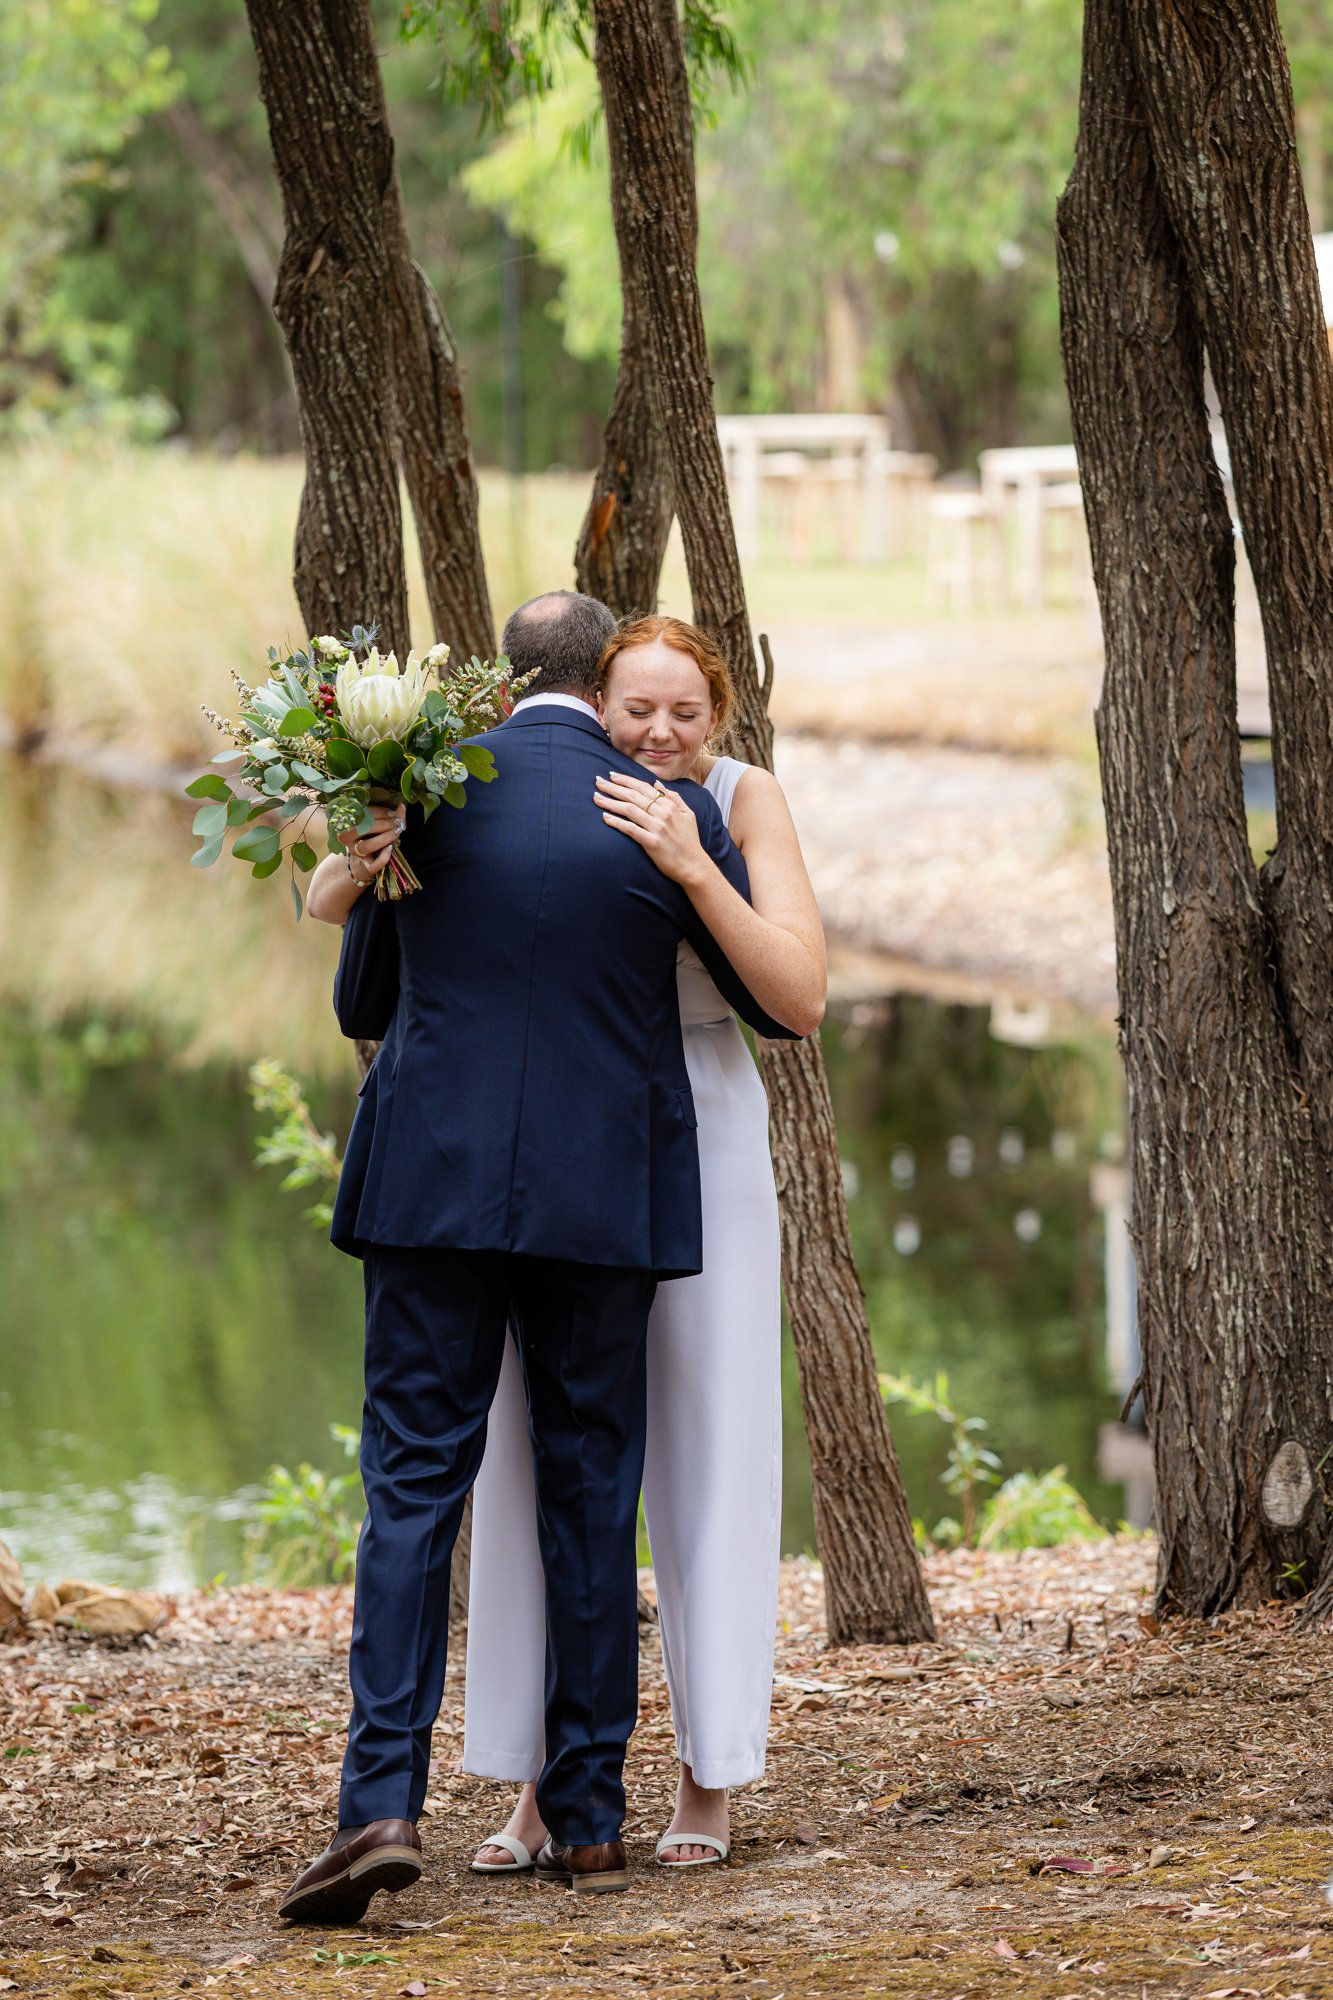 lady holding white bouquet while hugging a man